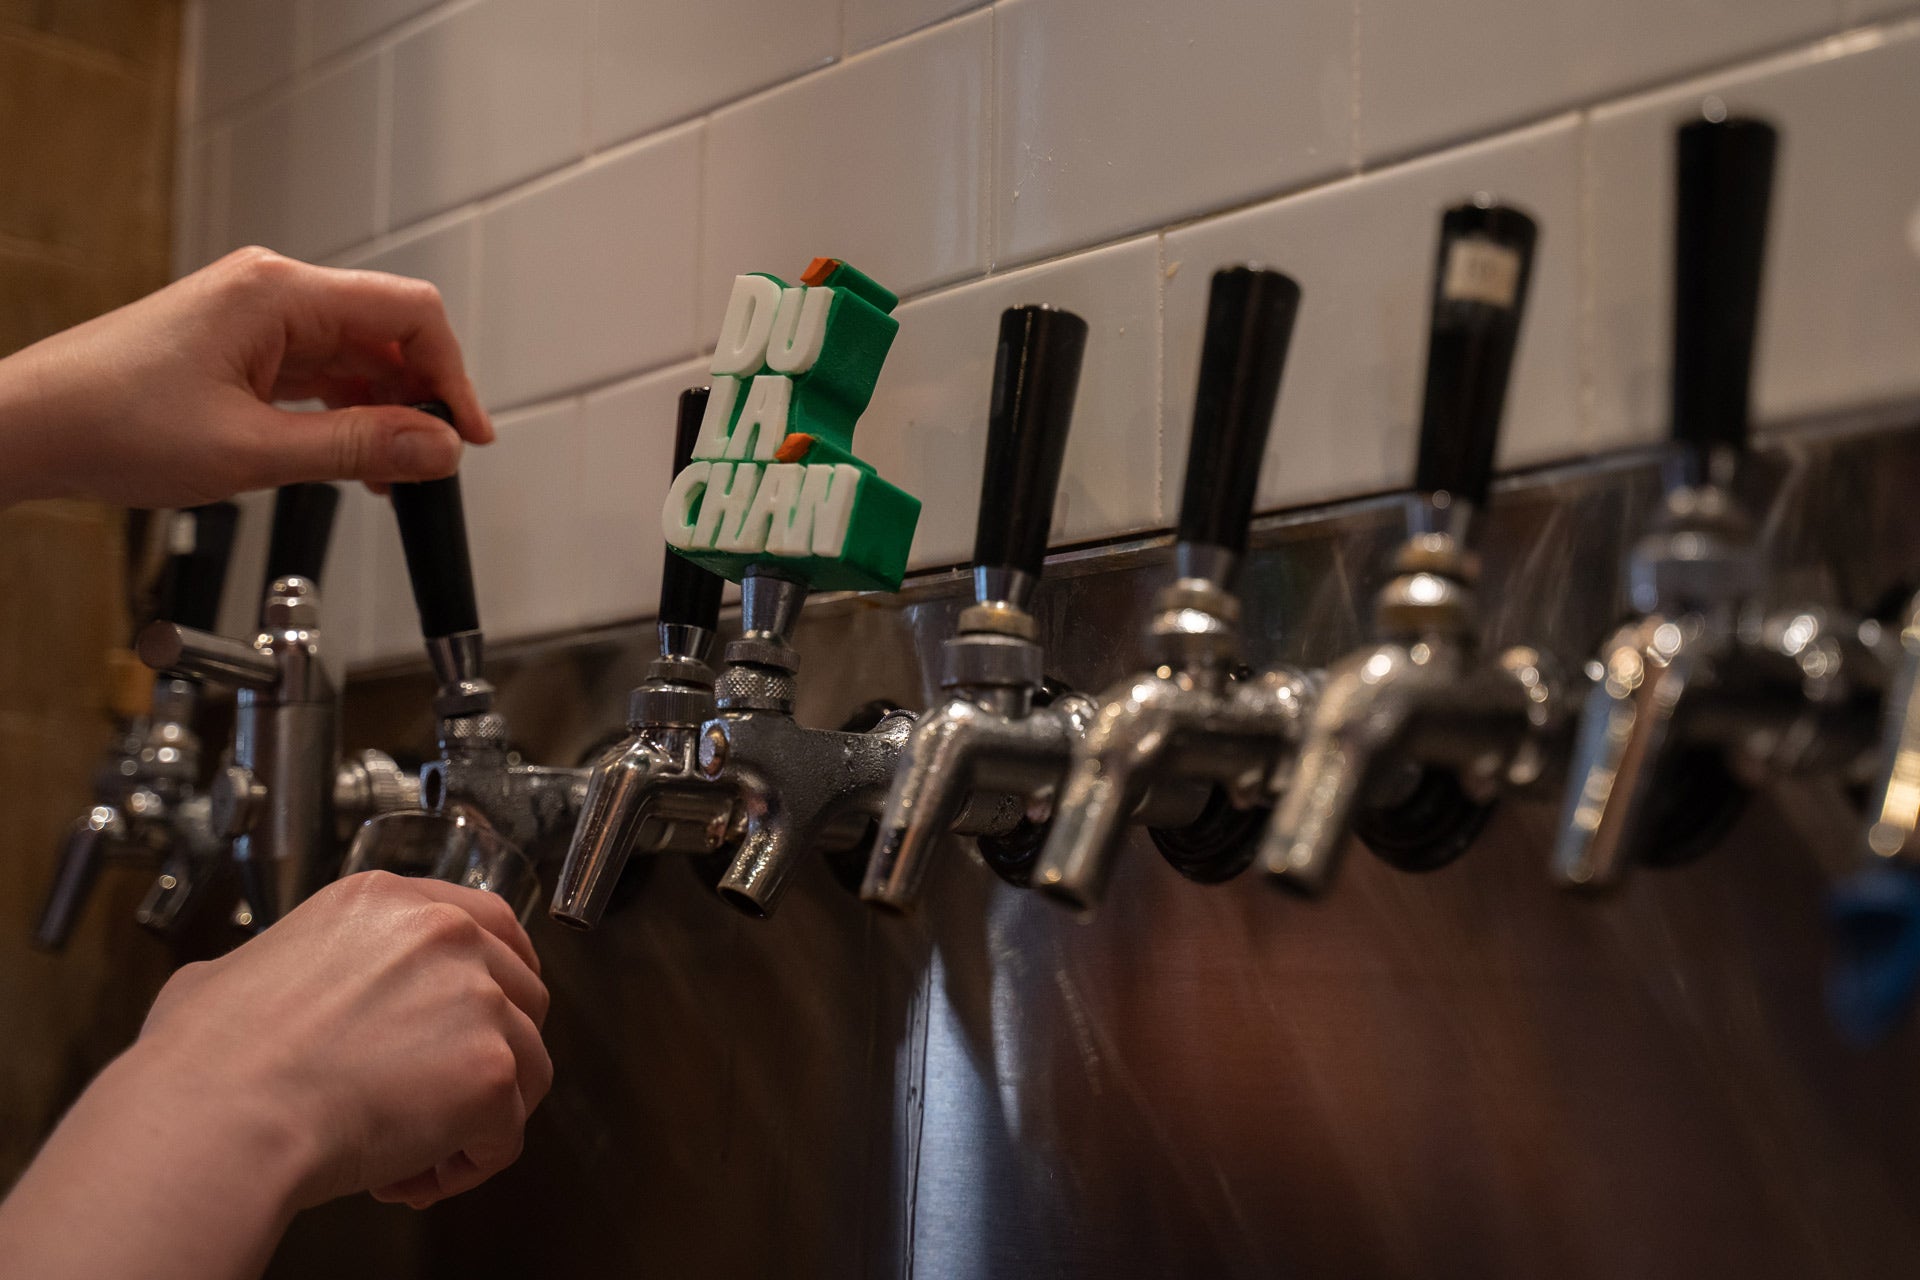 Taps at Lavery Brewing Co. in Erie, Pennsylvania